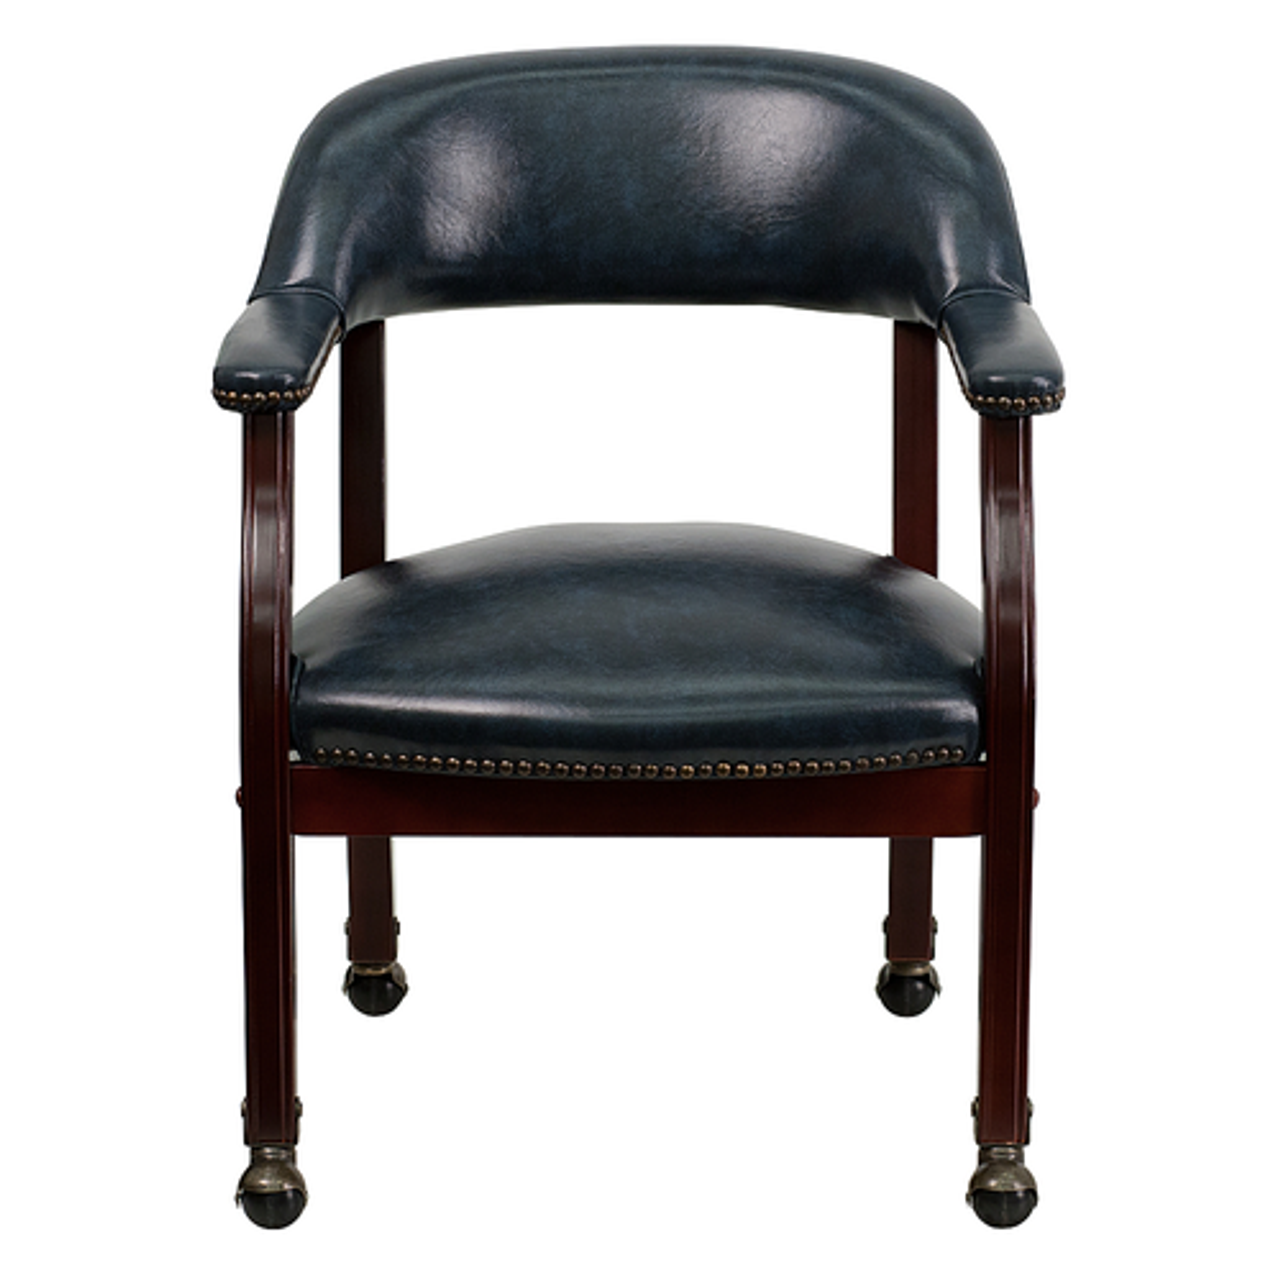 Flash Furniture - Luxurious Conference Chair with Accent Nail Trim and Casters - Navy Vinyl